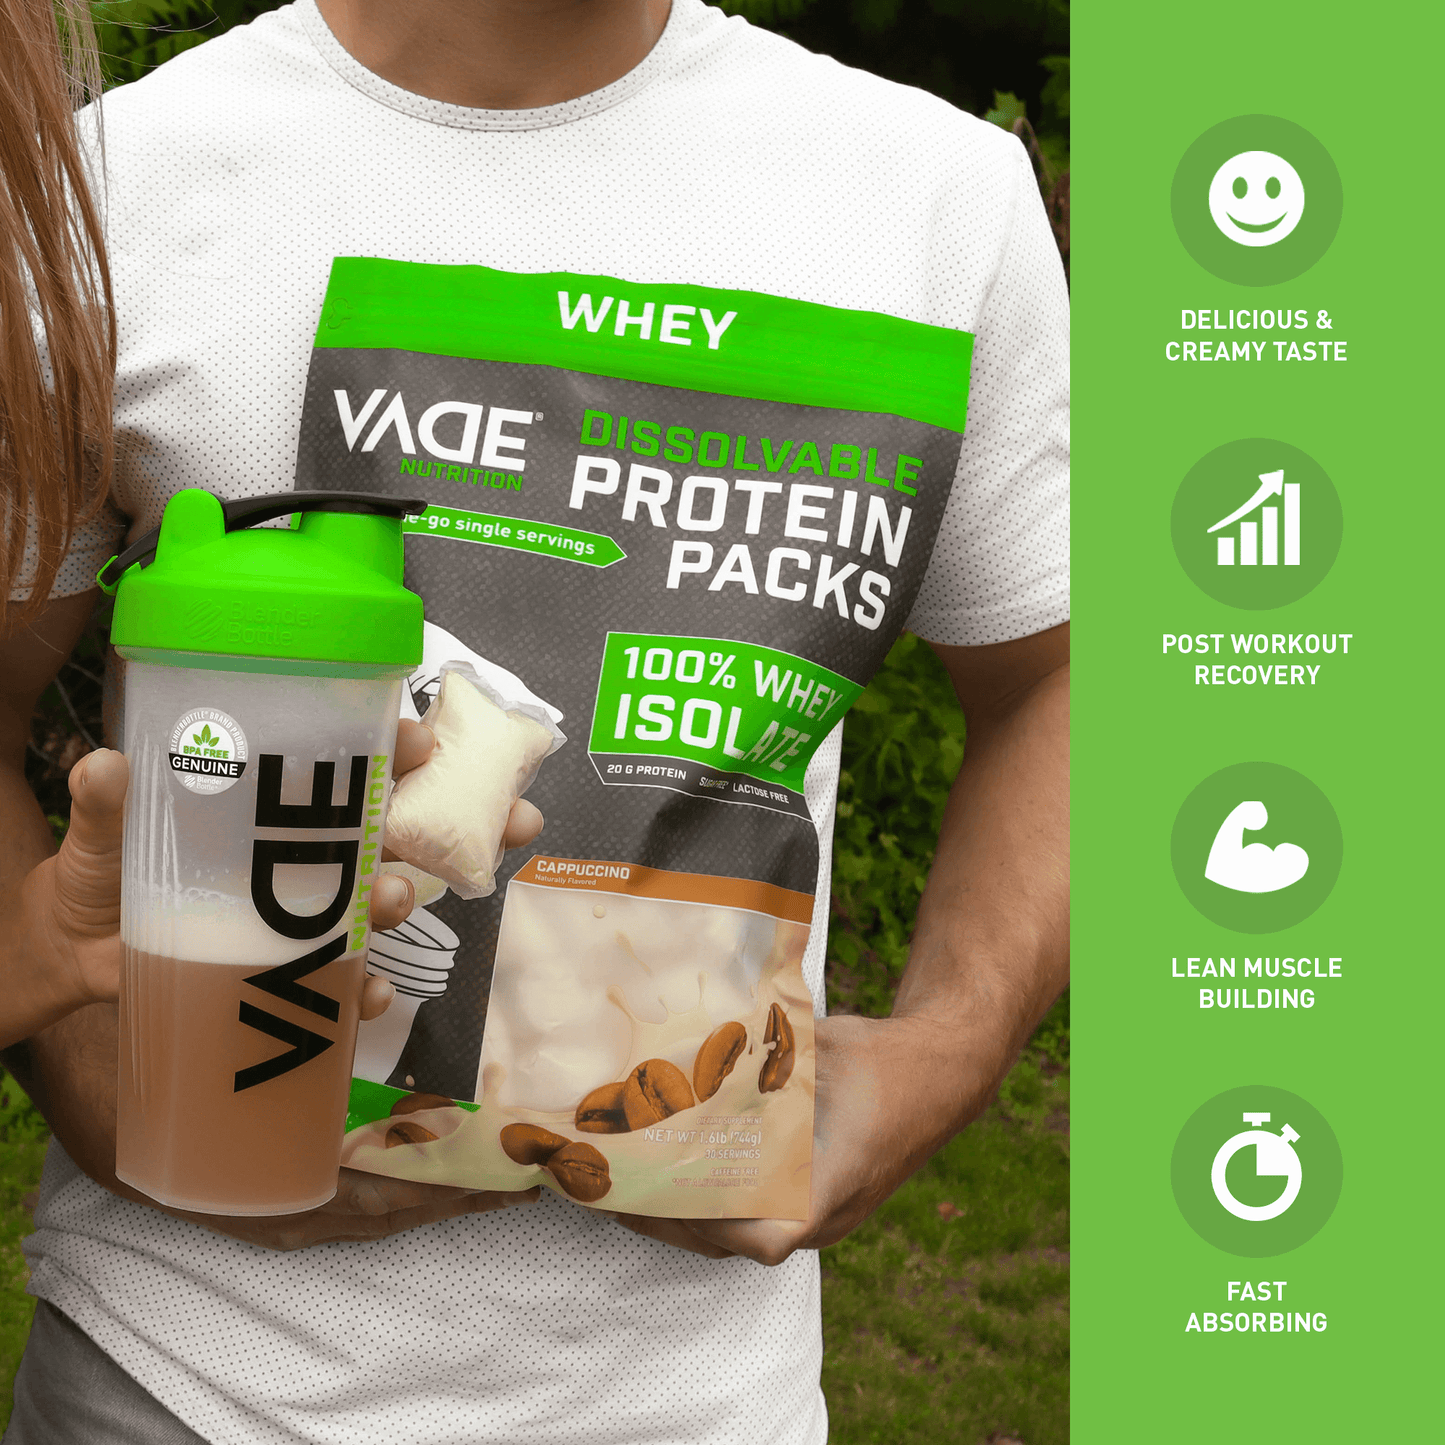 100% WHEY ISOLATE PROTEIN CAPPUCCINO